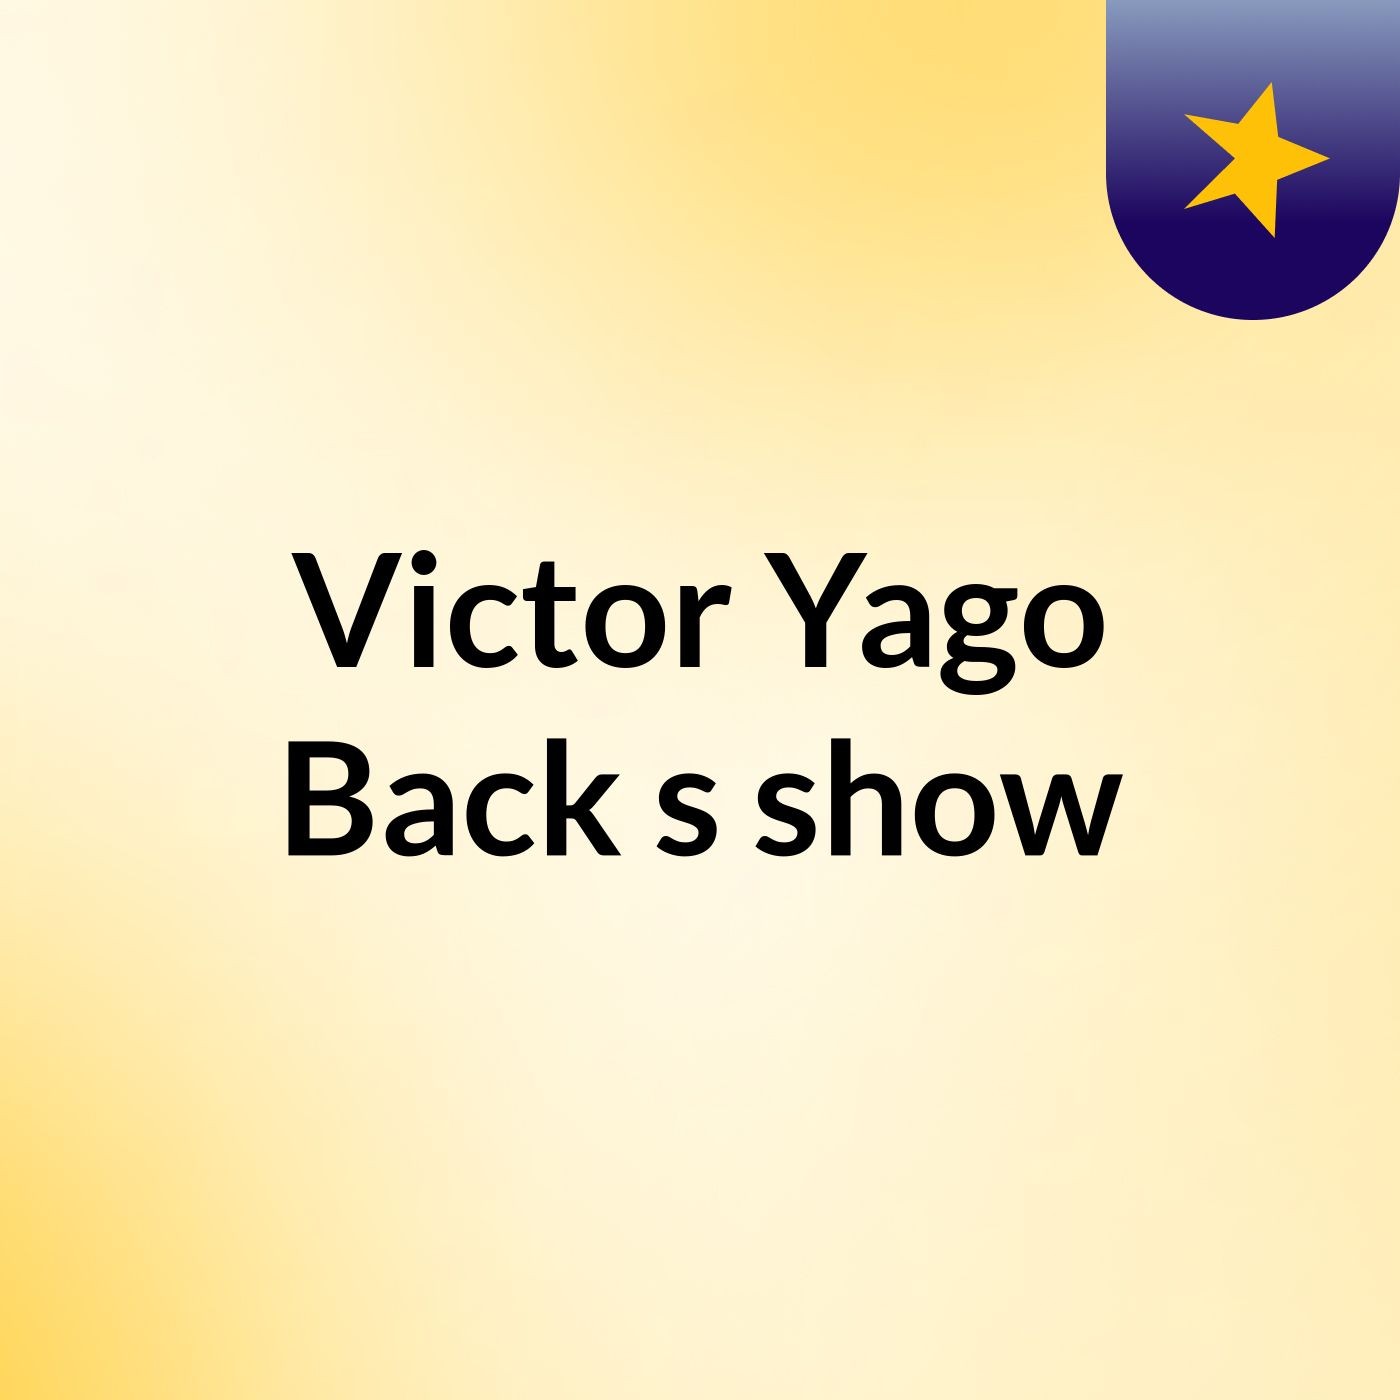 Victor Yago Back's show